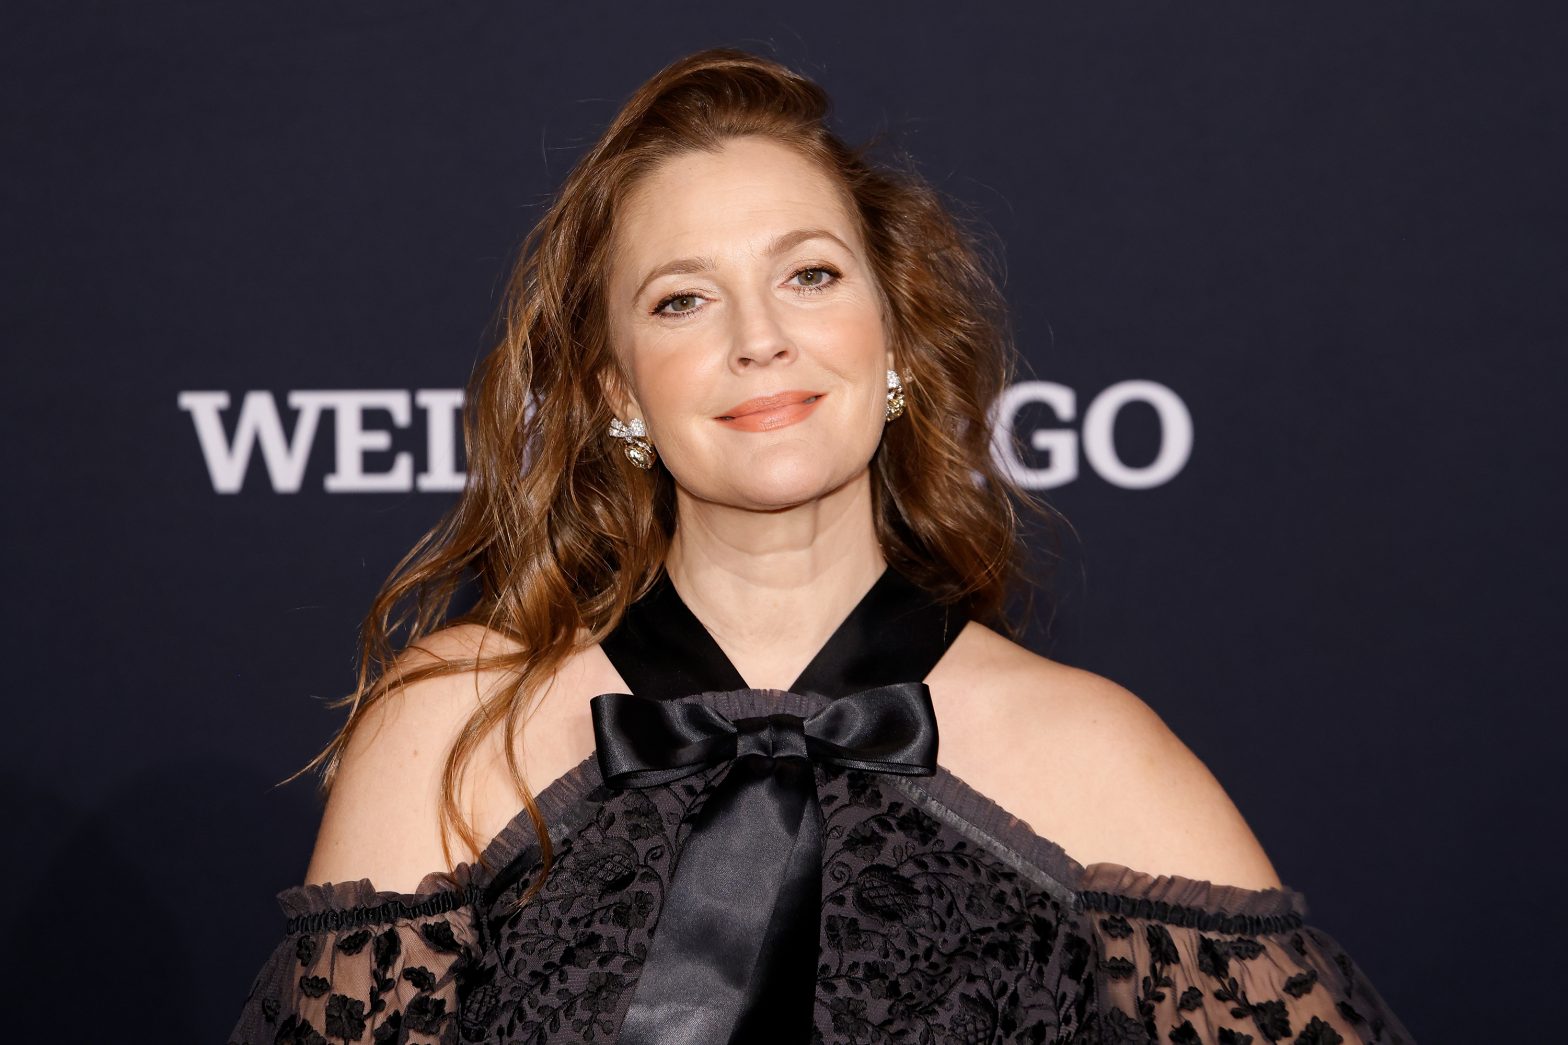 MTV Music and TV Awards: Why Drew Barrymore has stepped down as host?